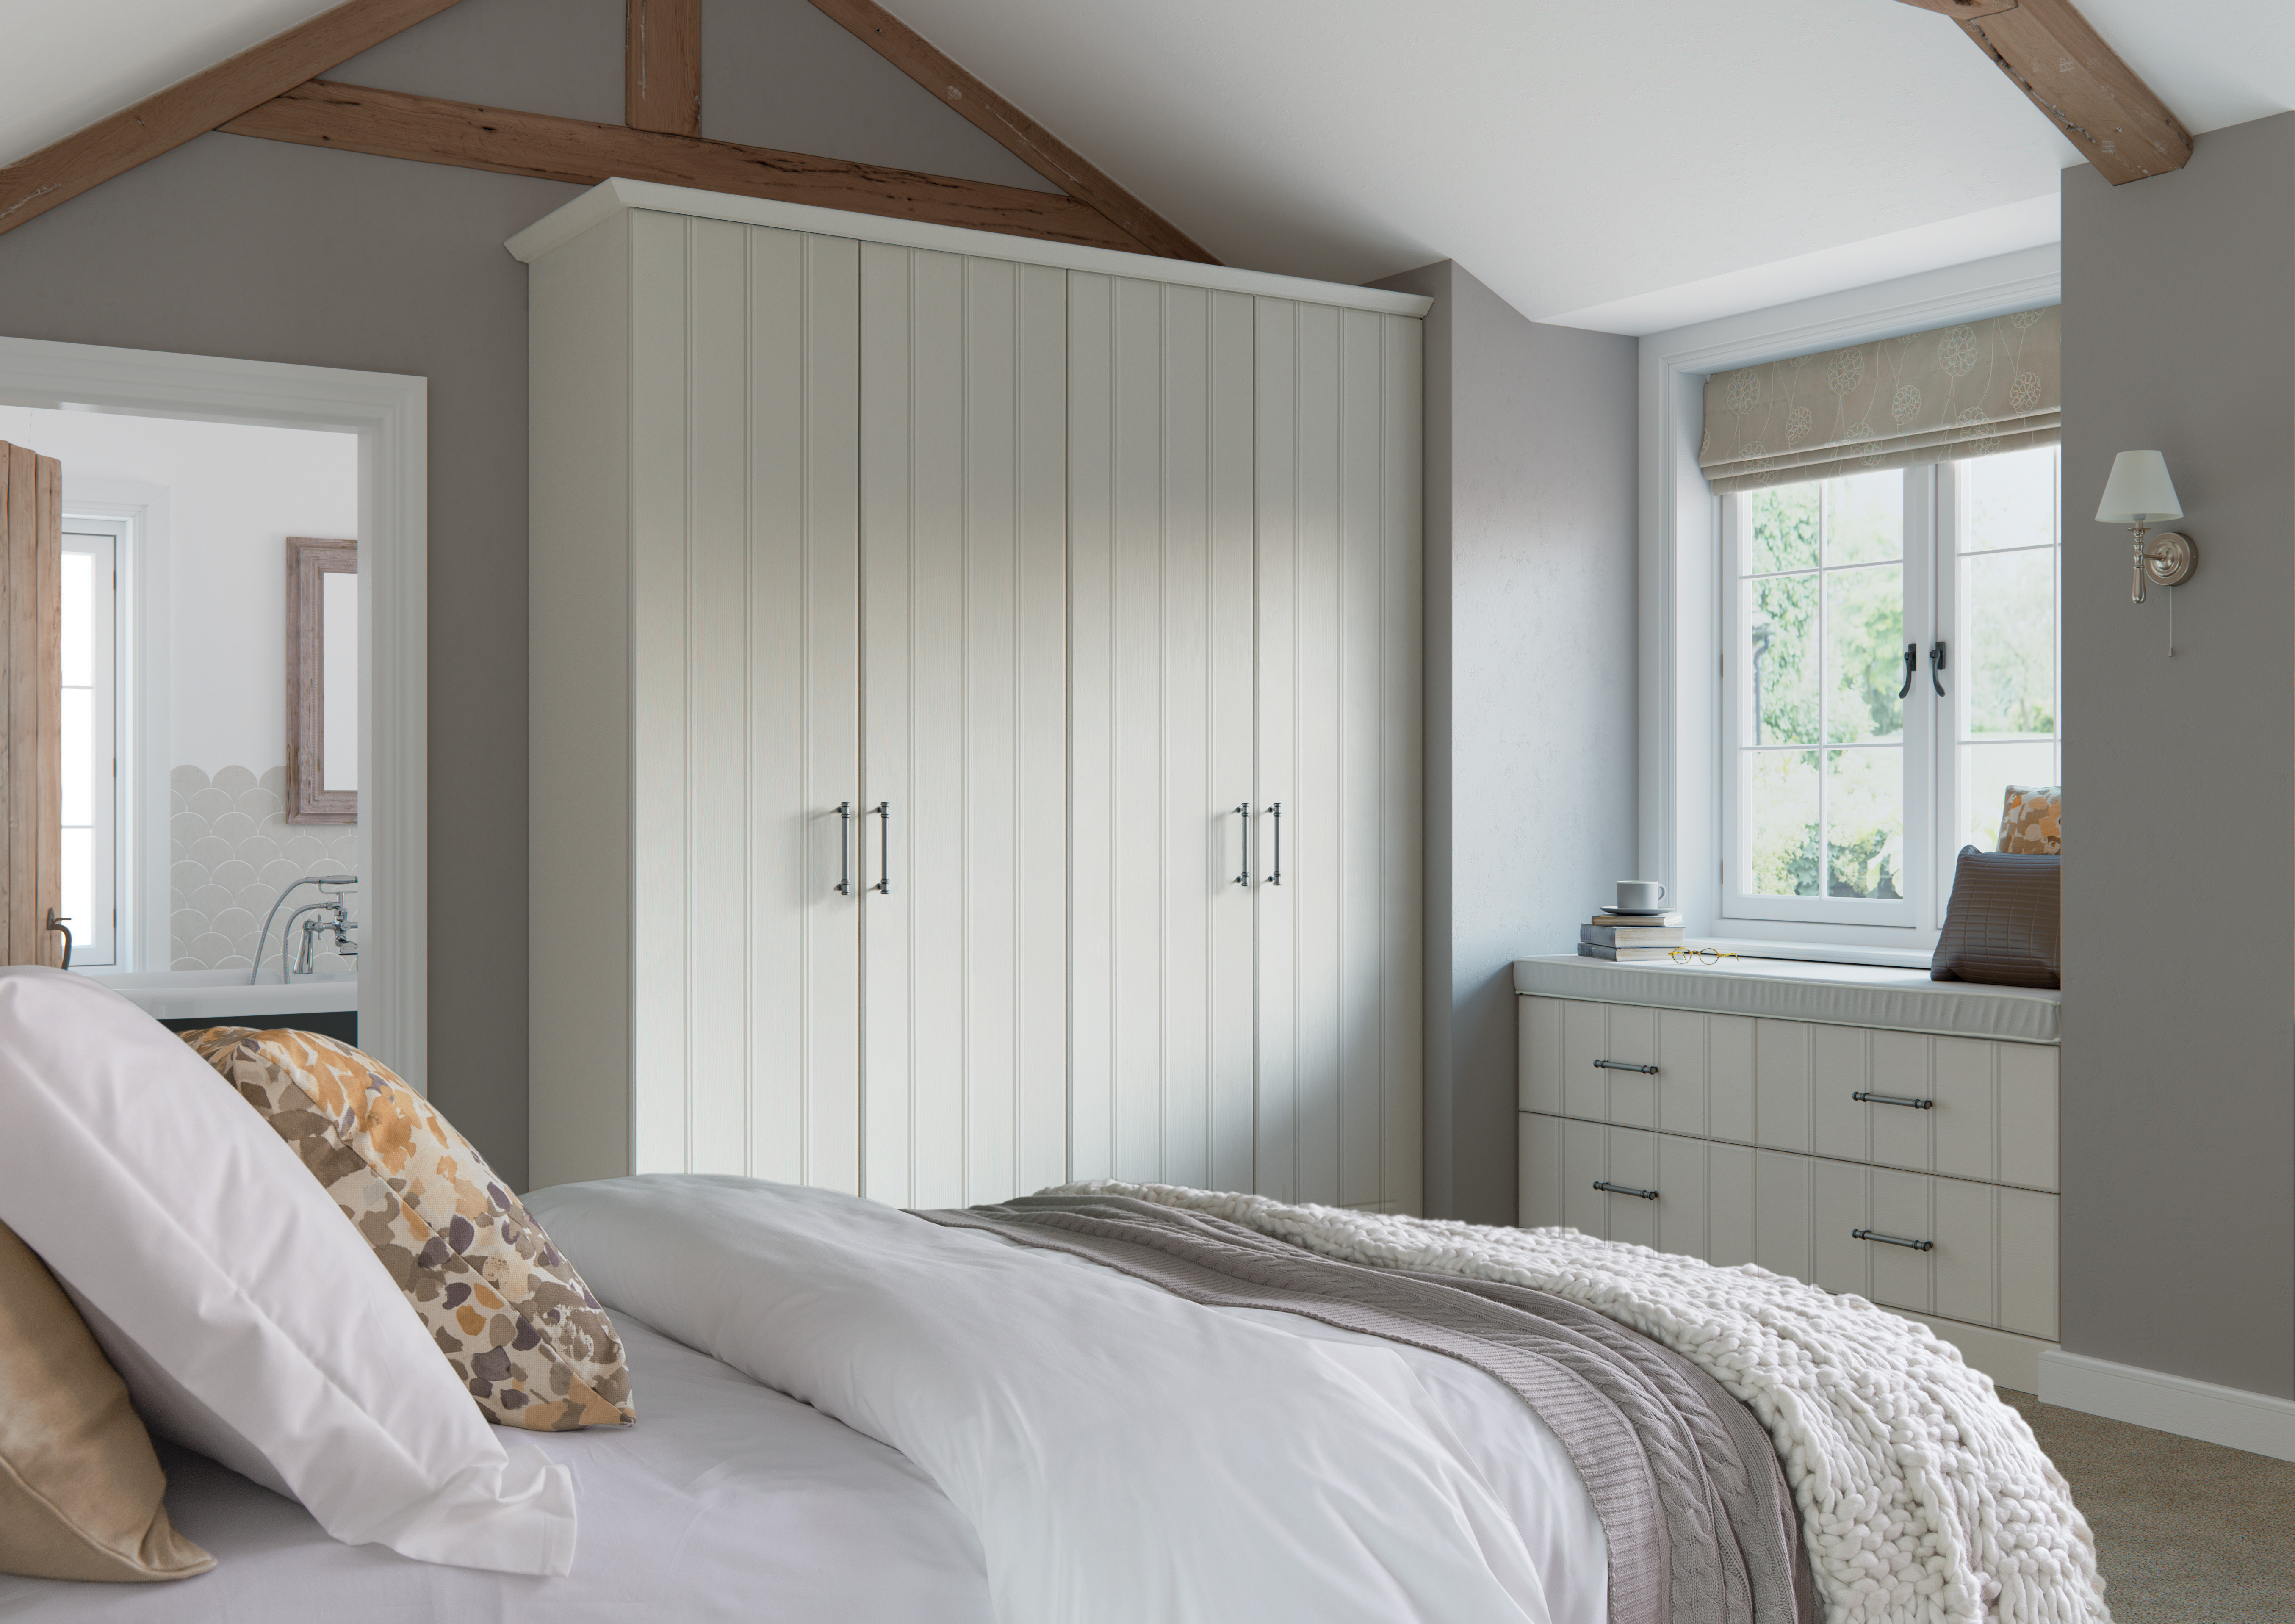 Grooved Bedrooms